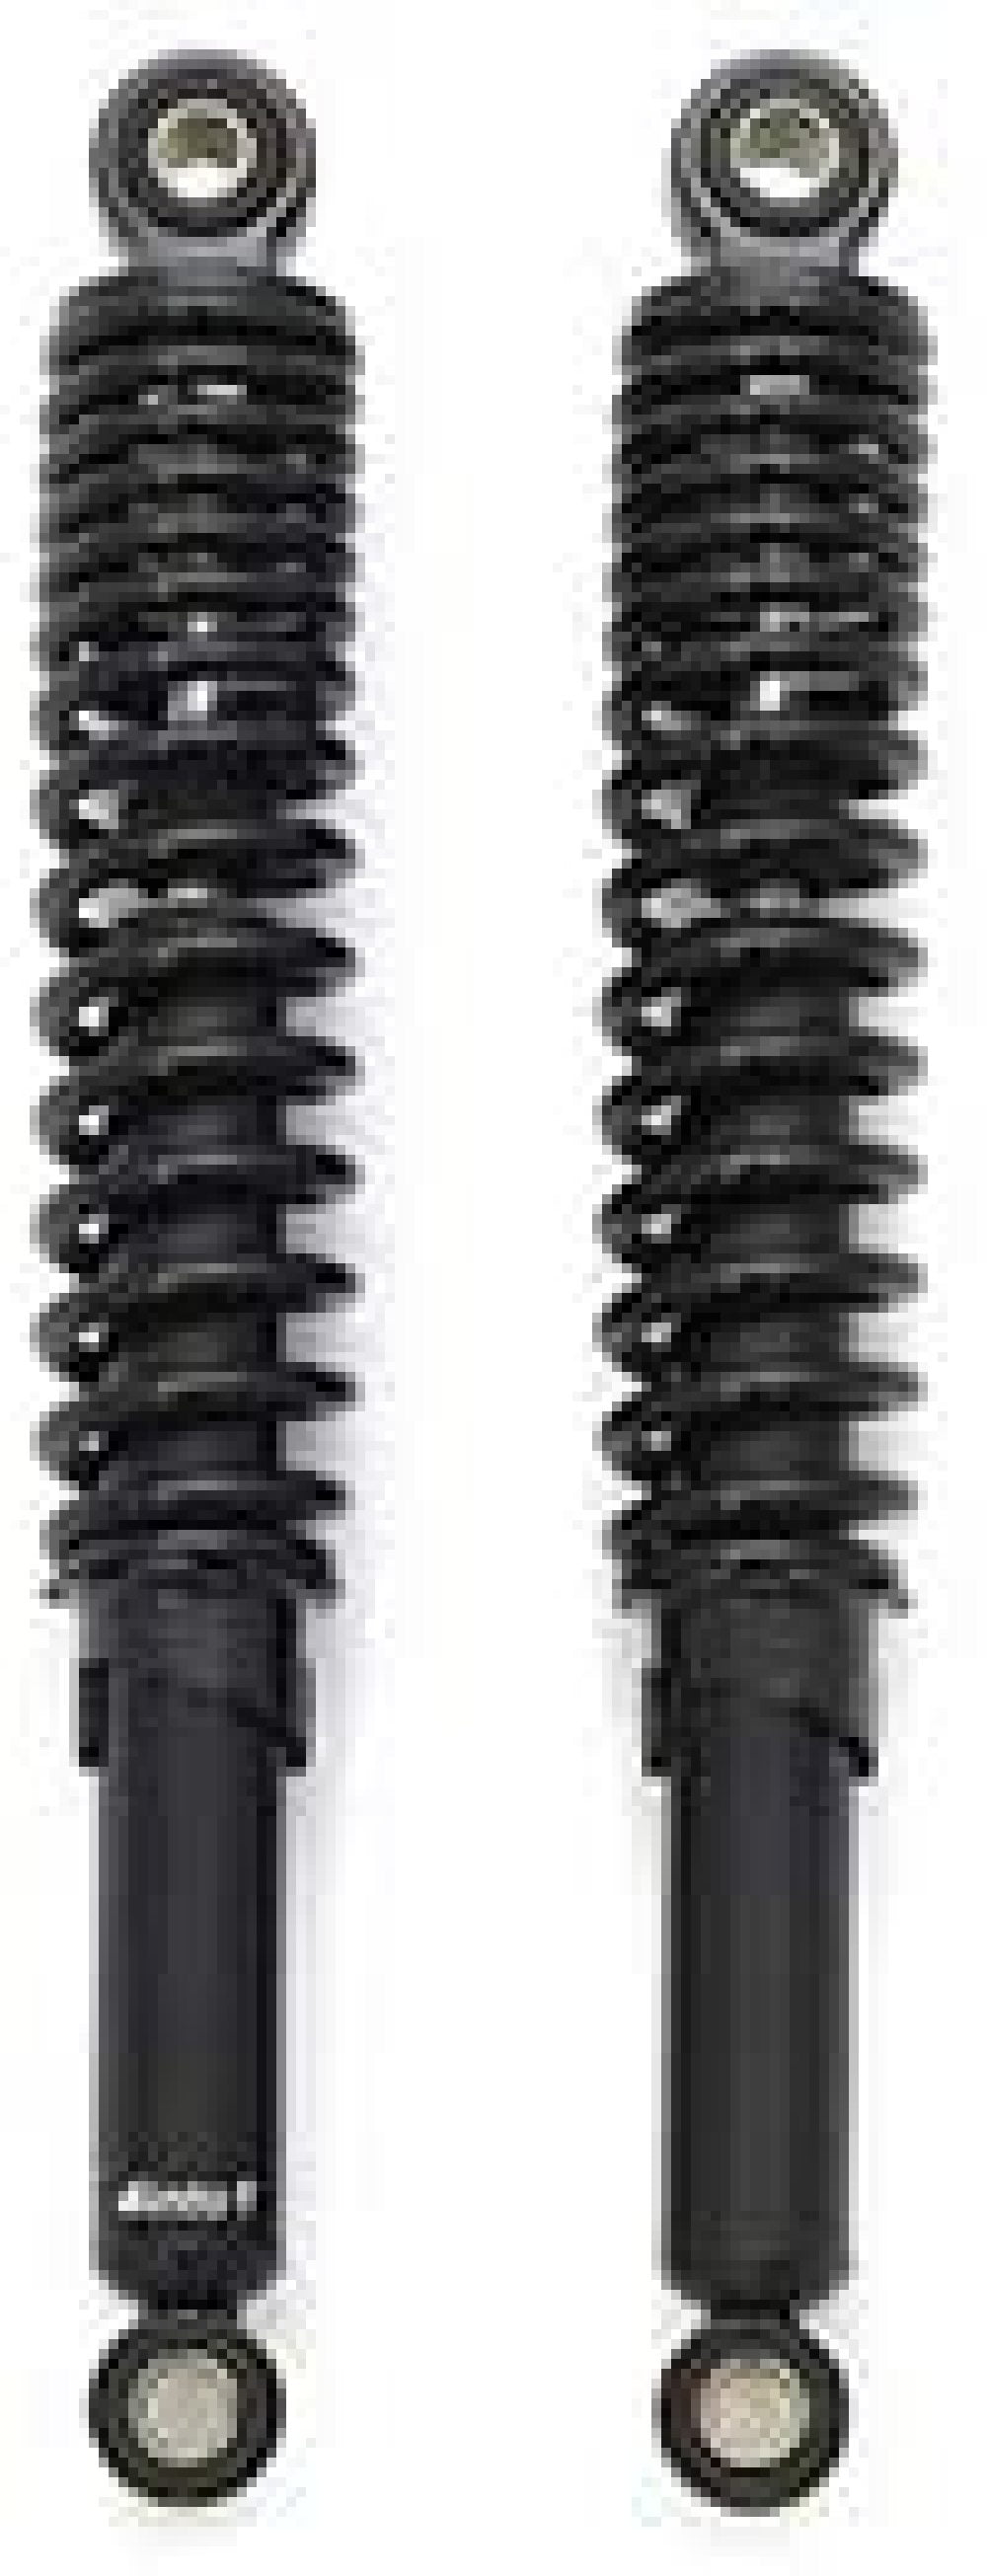 335mm 13 1/8 - Compatible with Honda S65 CL/CT70 XL75 CL/CT/CM/S90 CM91 CT110 Black Shocks Eye To Eye 